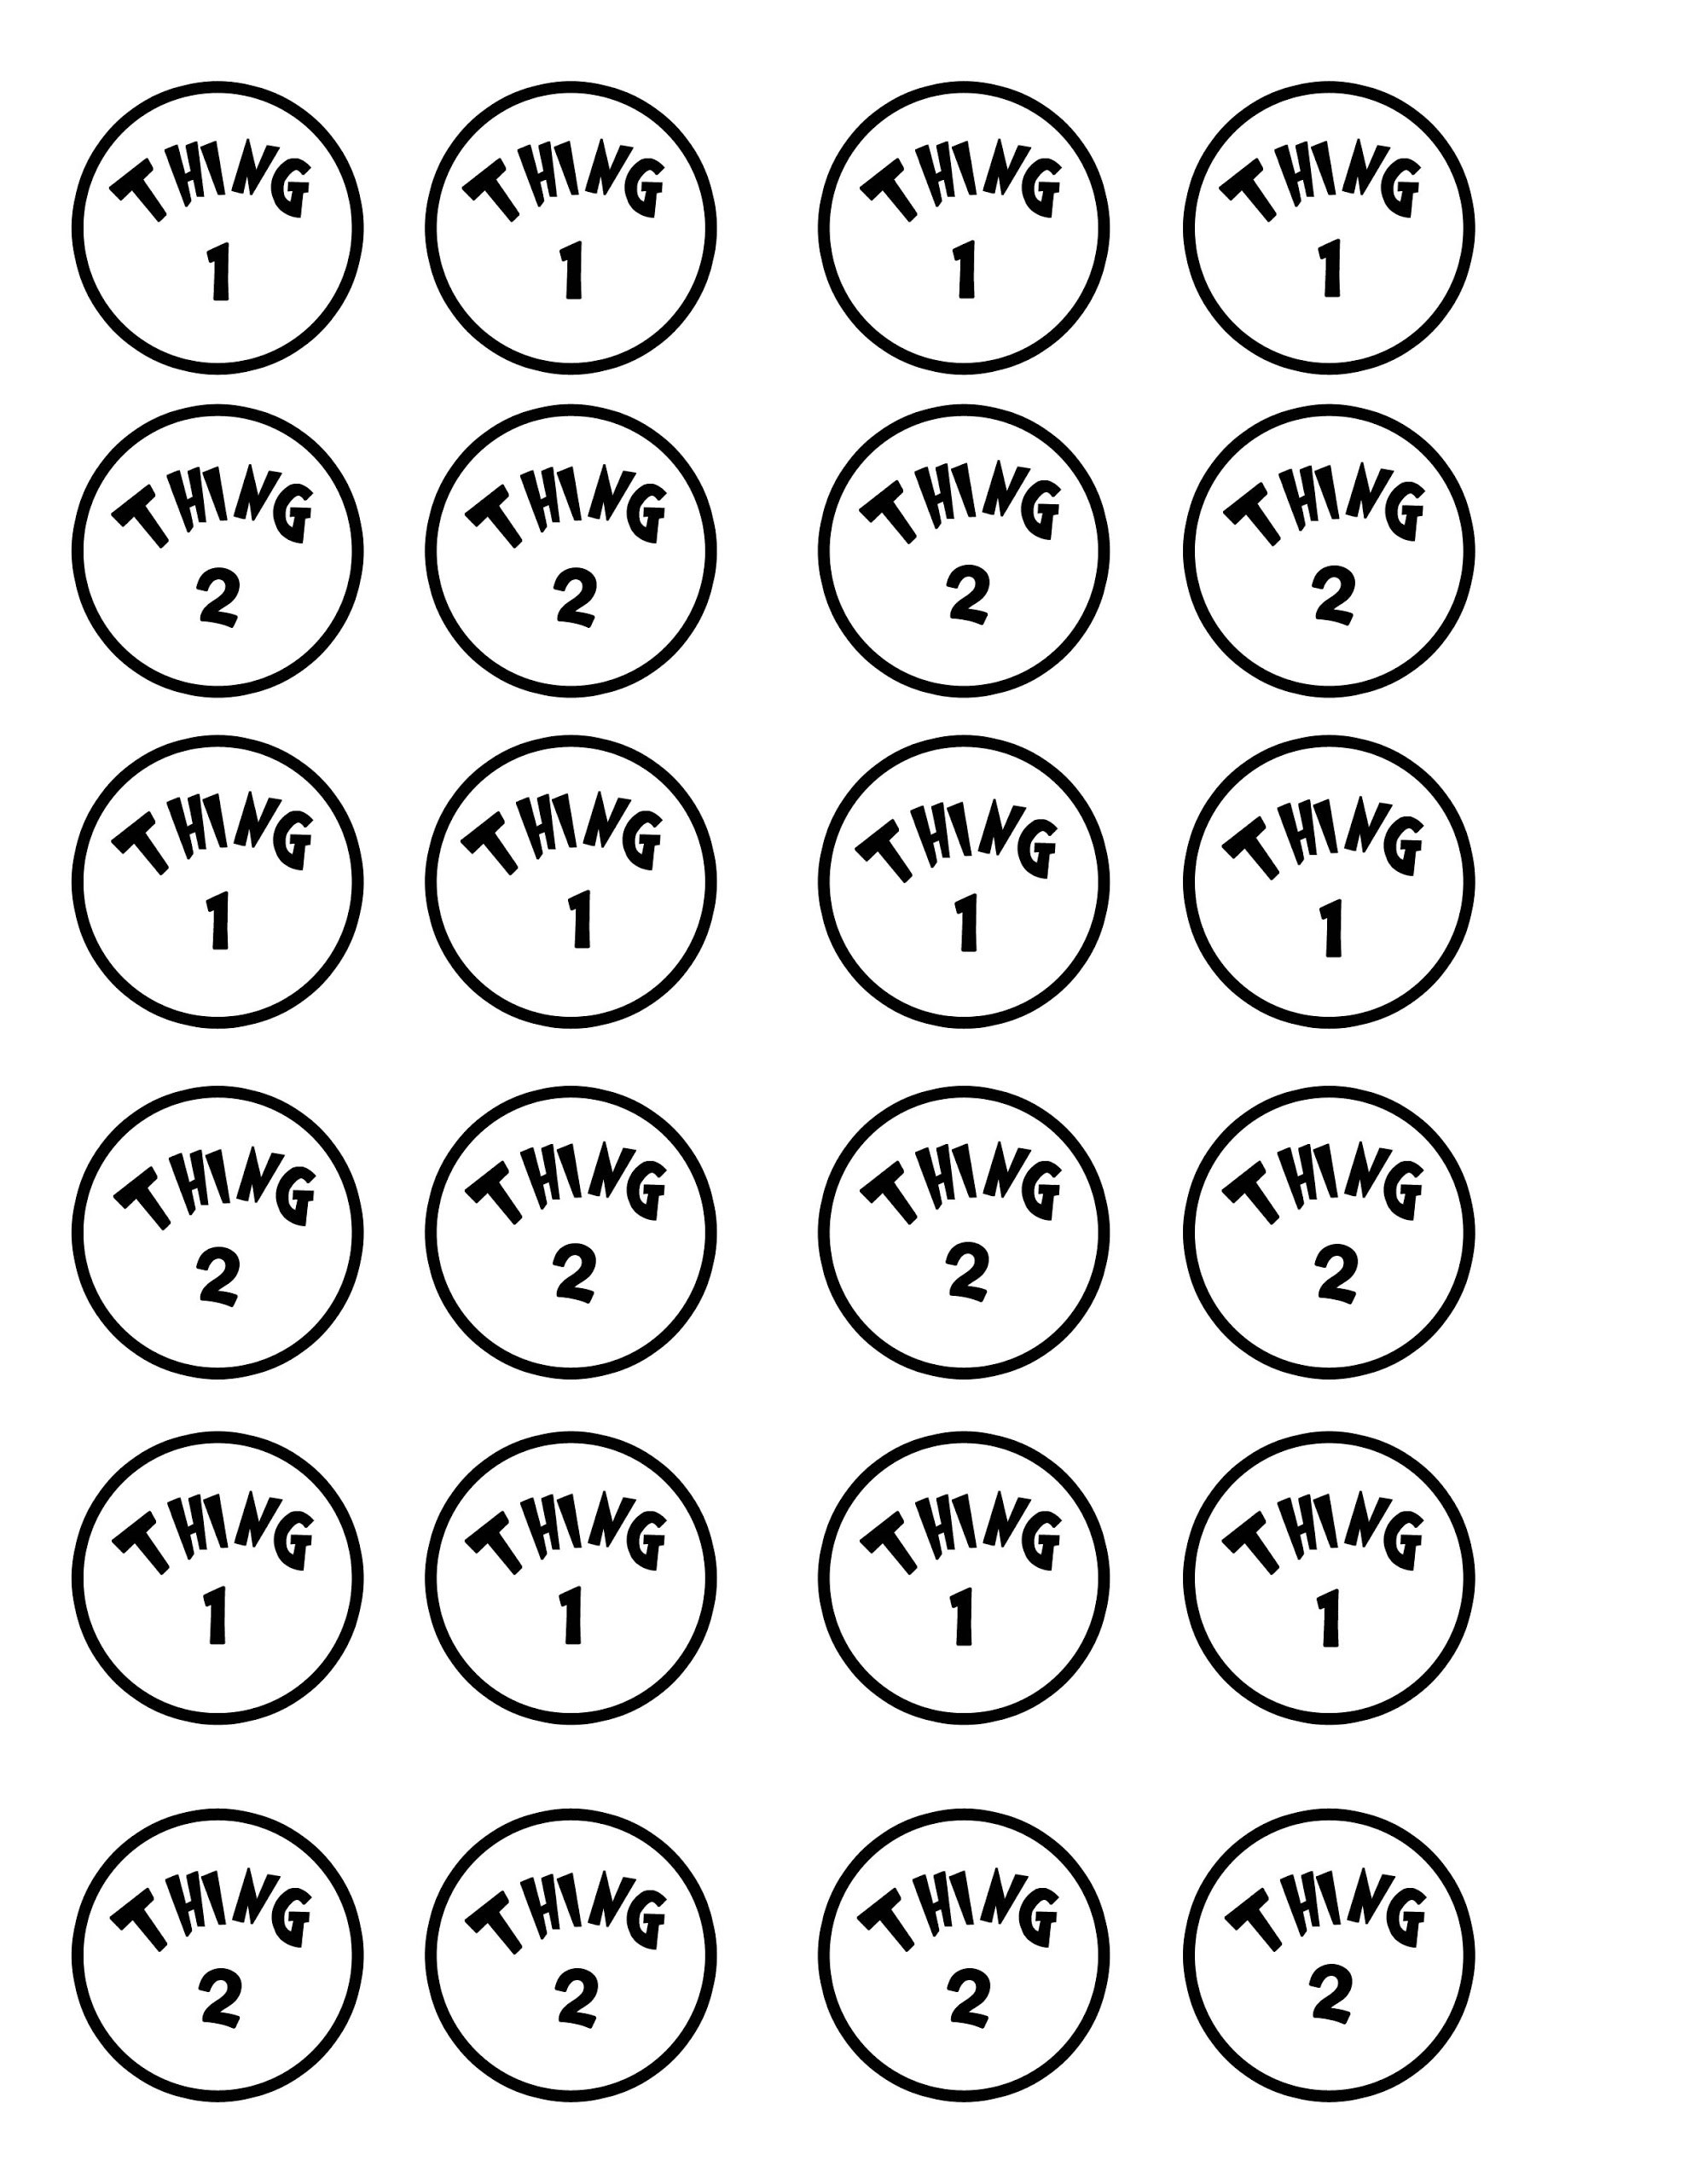 printable-thing-1-and-thing-2-face-template-get-your-hands-on-amazing-free-printables